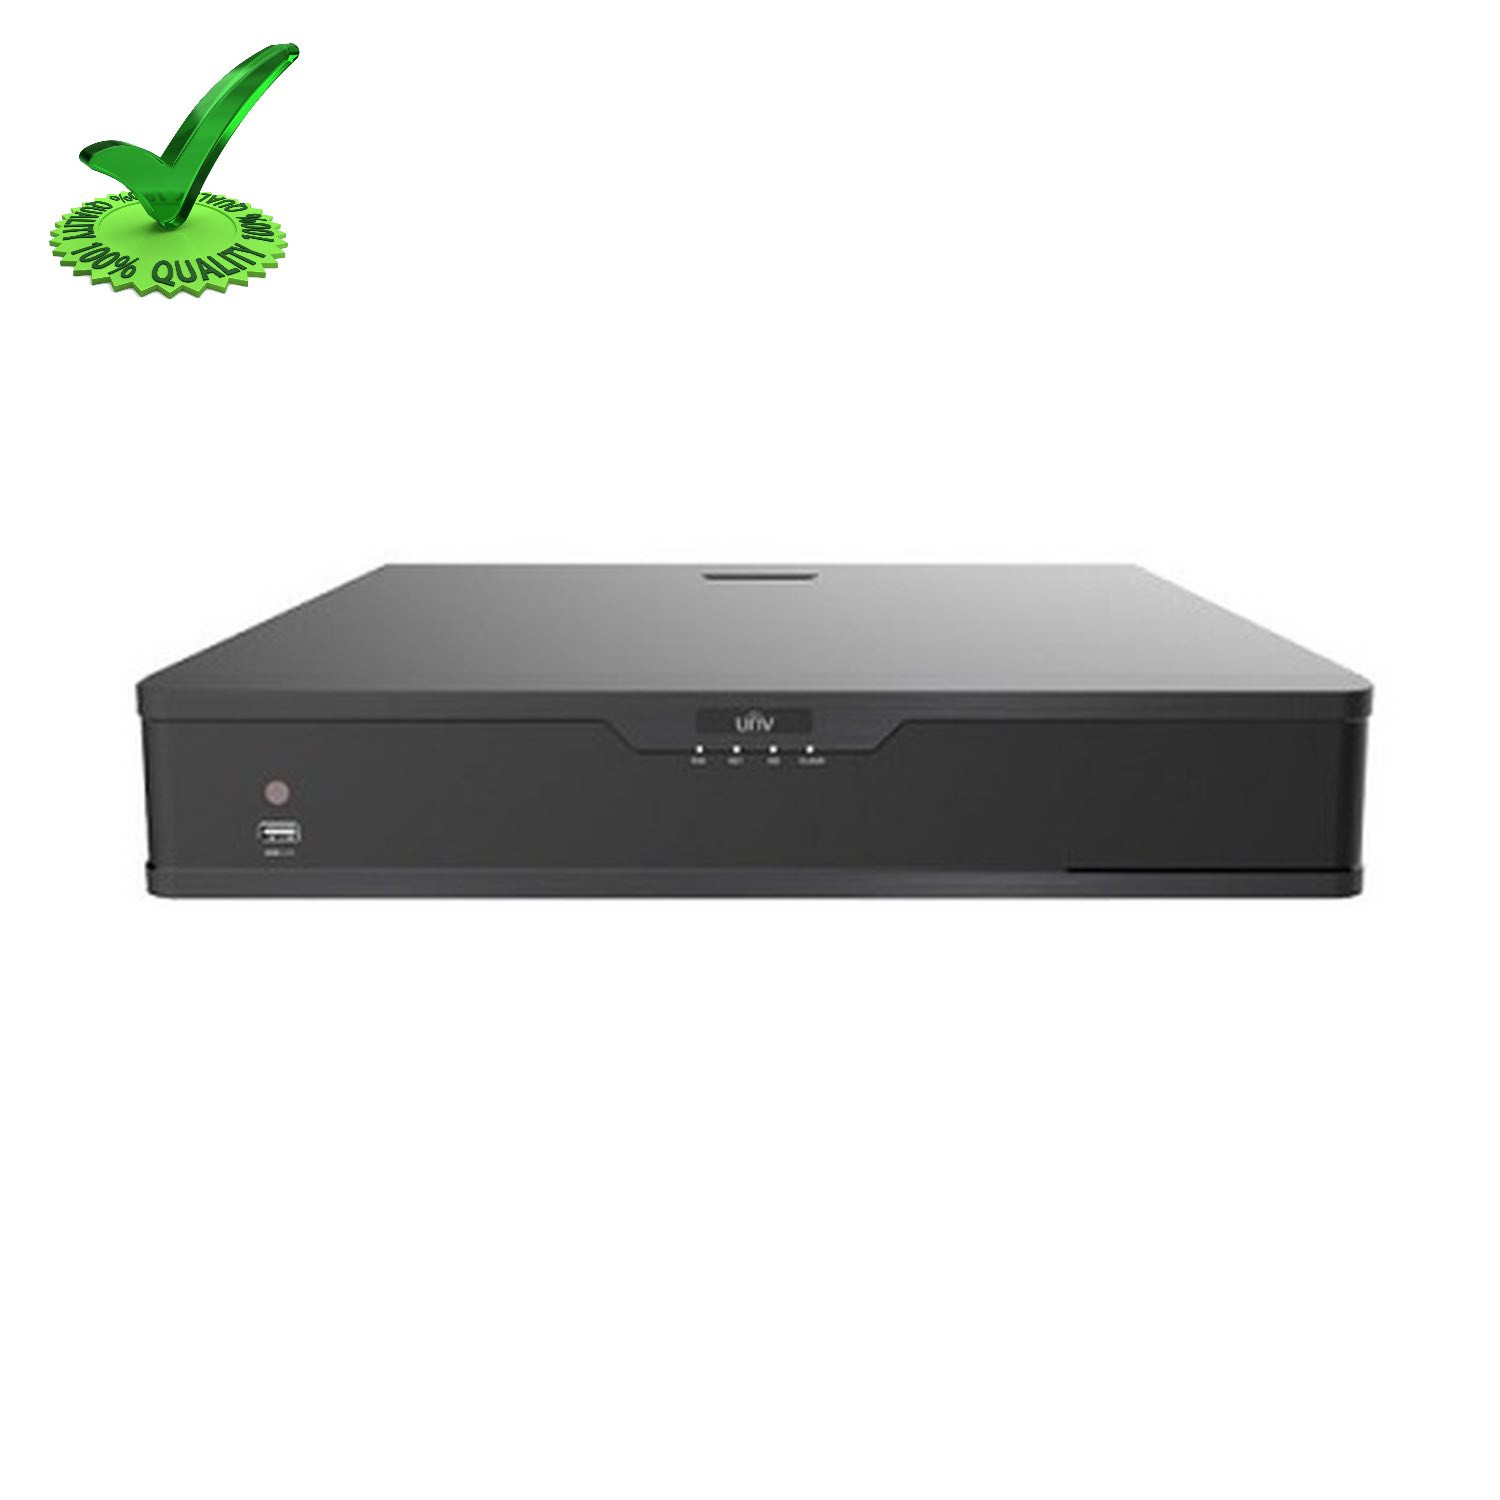 Uniview NVR304-16S-P16 16Ch HD Network Video Recorder